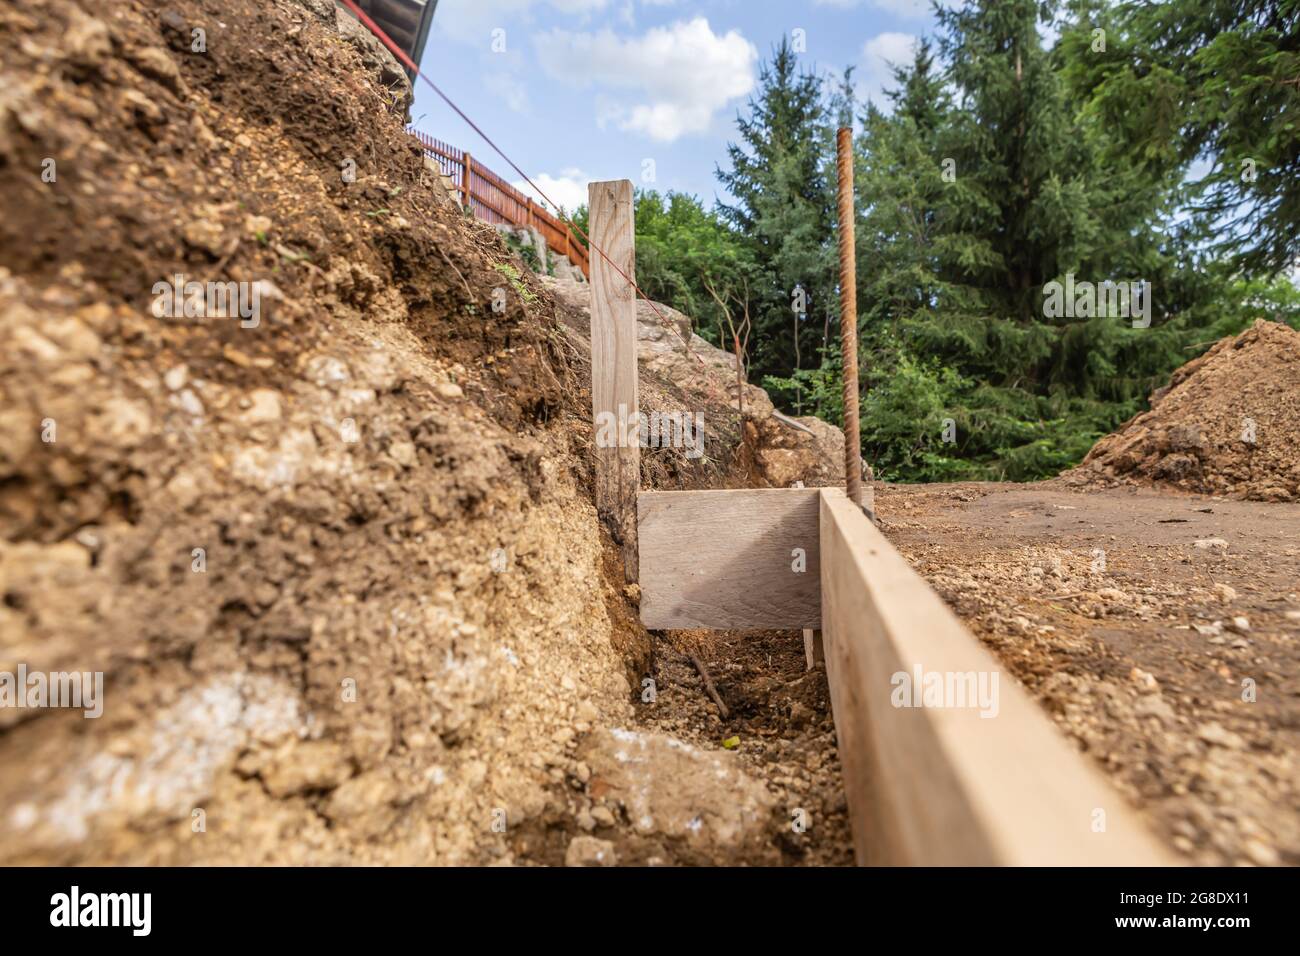 Construction planning in a garden to lay bricks to build a wall Stock Photo